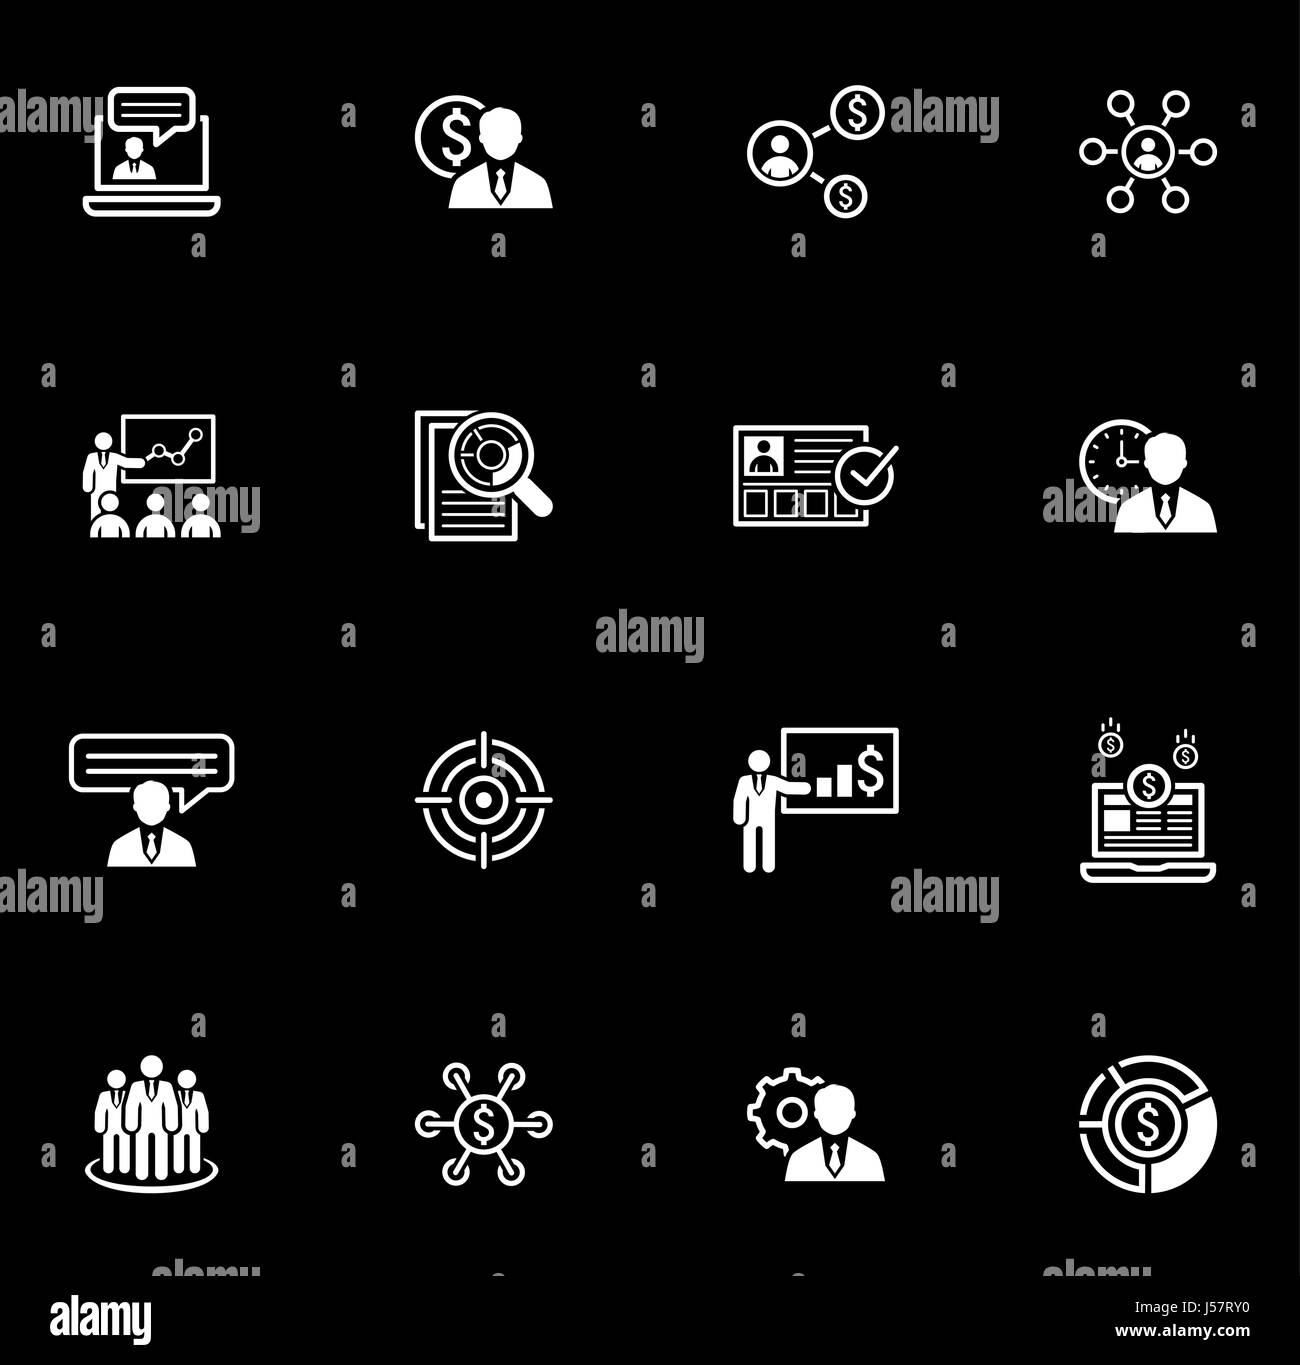 Business and Finances Icons Set. Flat Design. Stock Vector